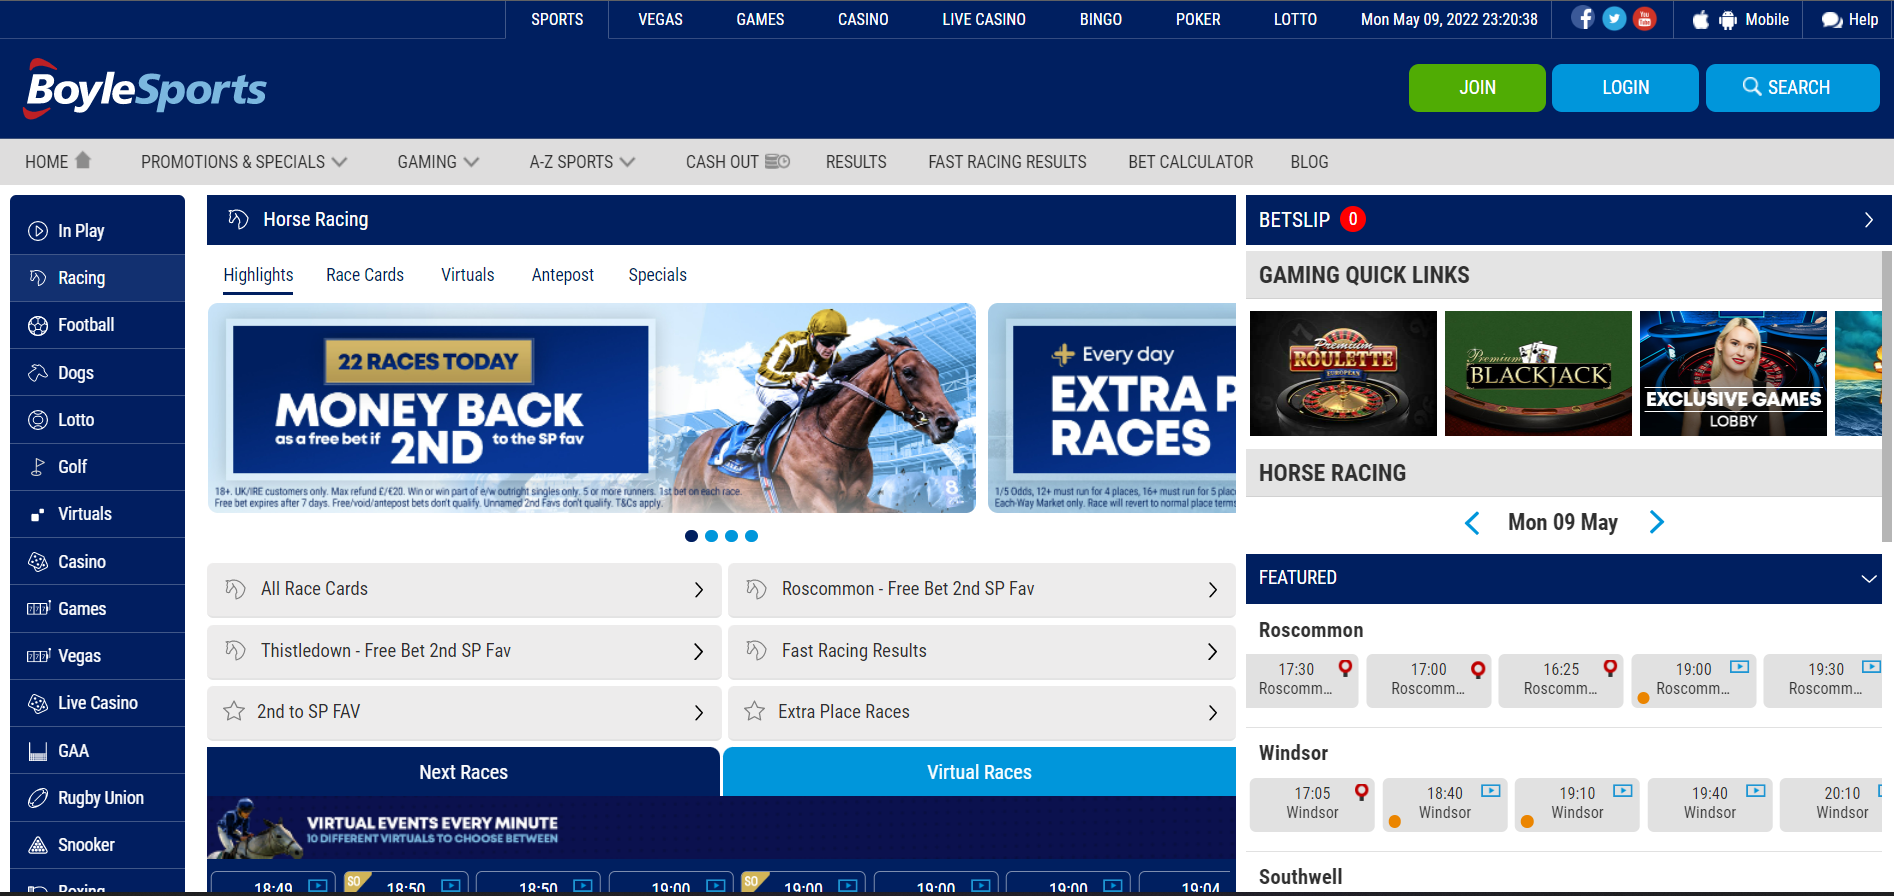 The official website of BoyleSports showing the page for online horse race betting